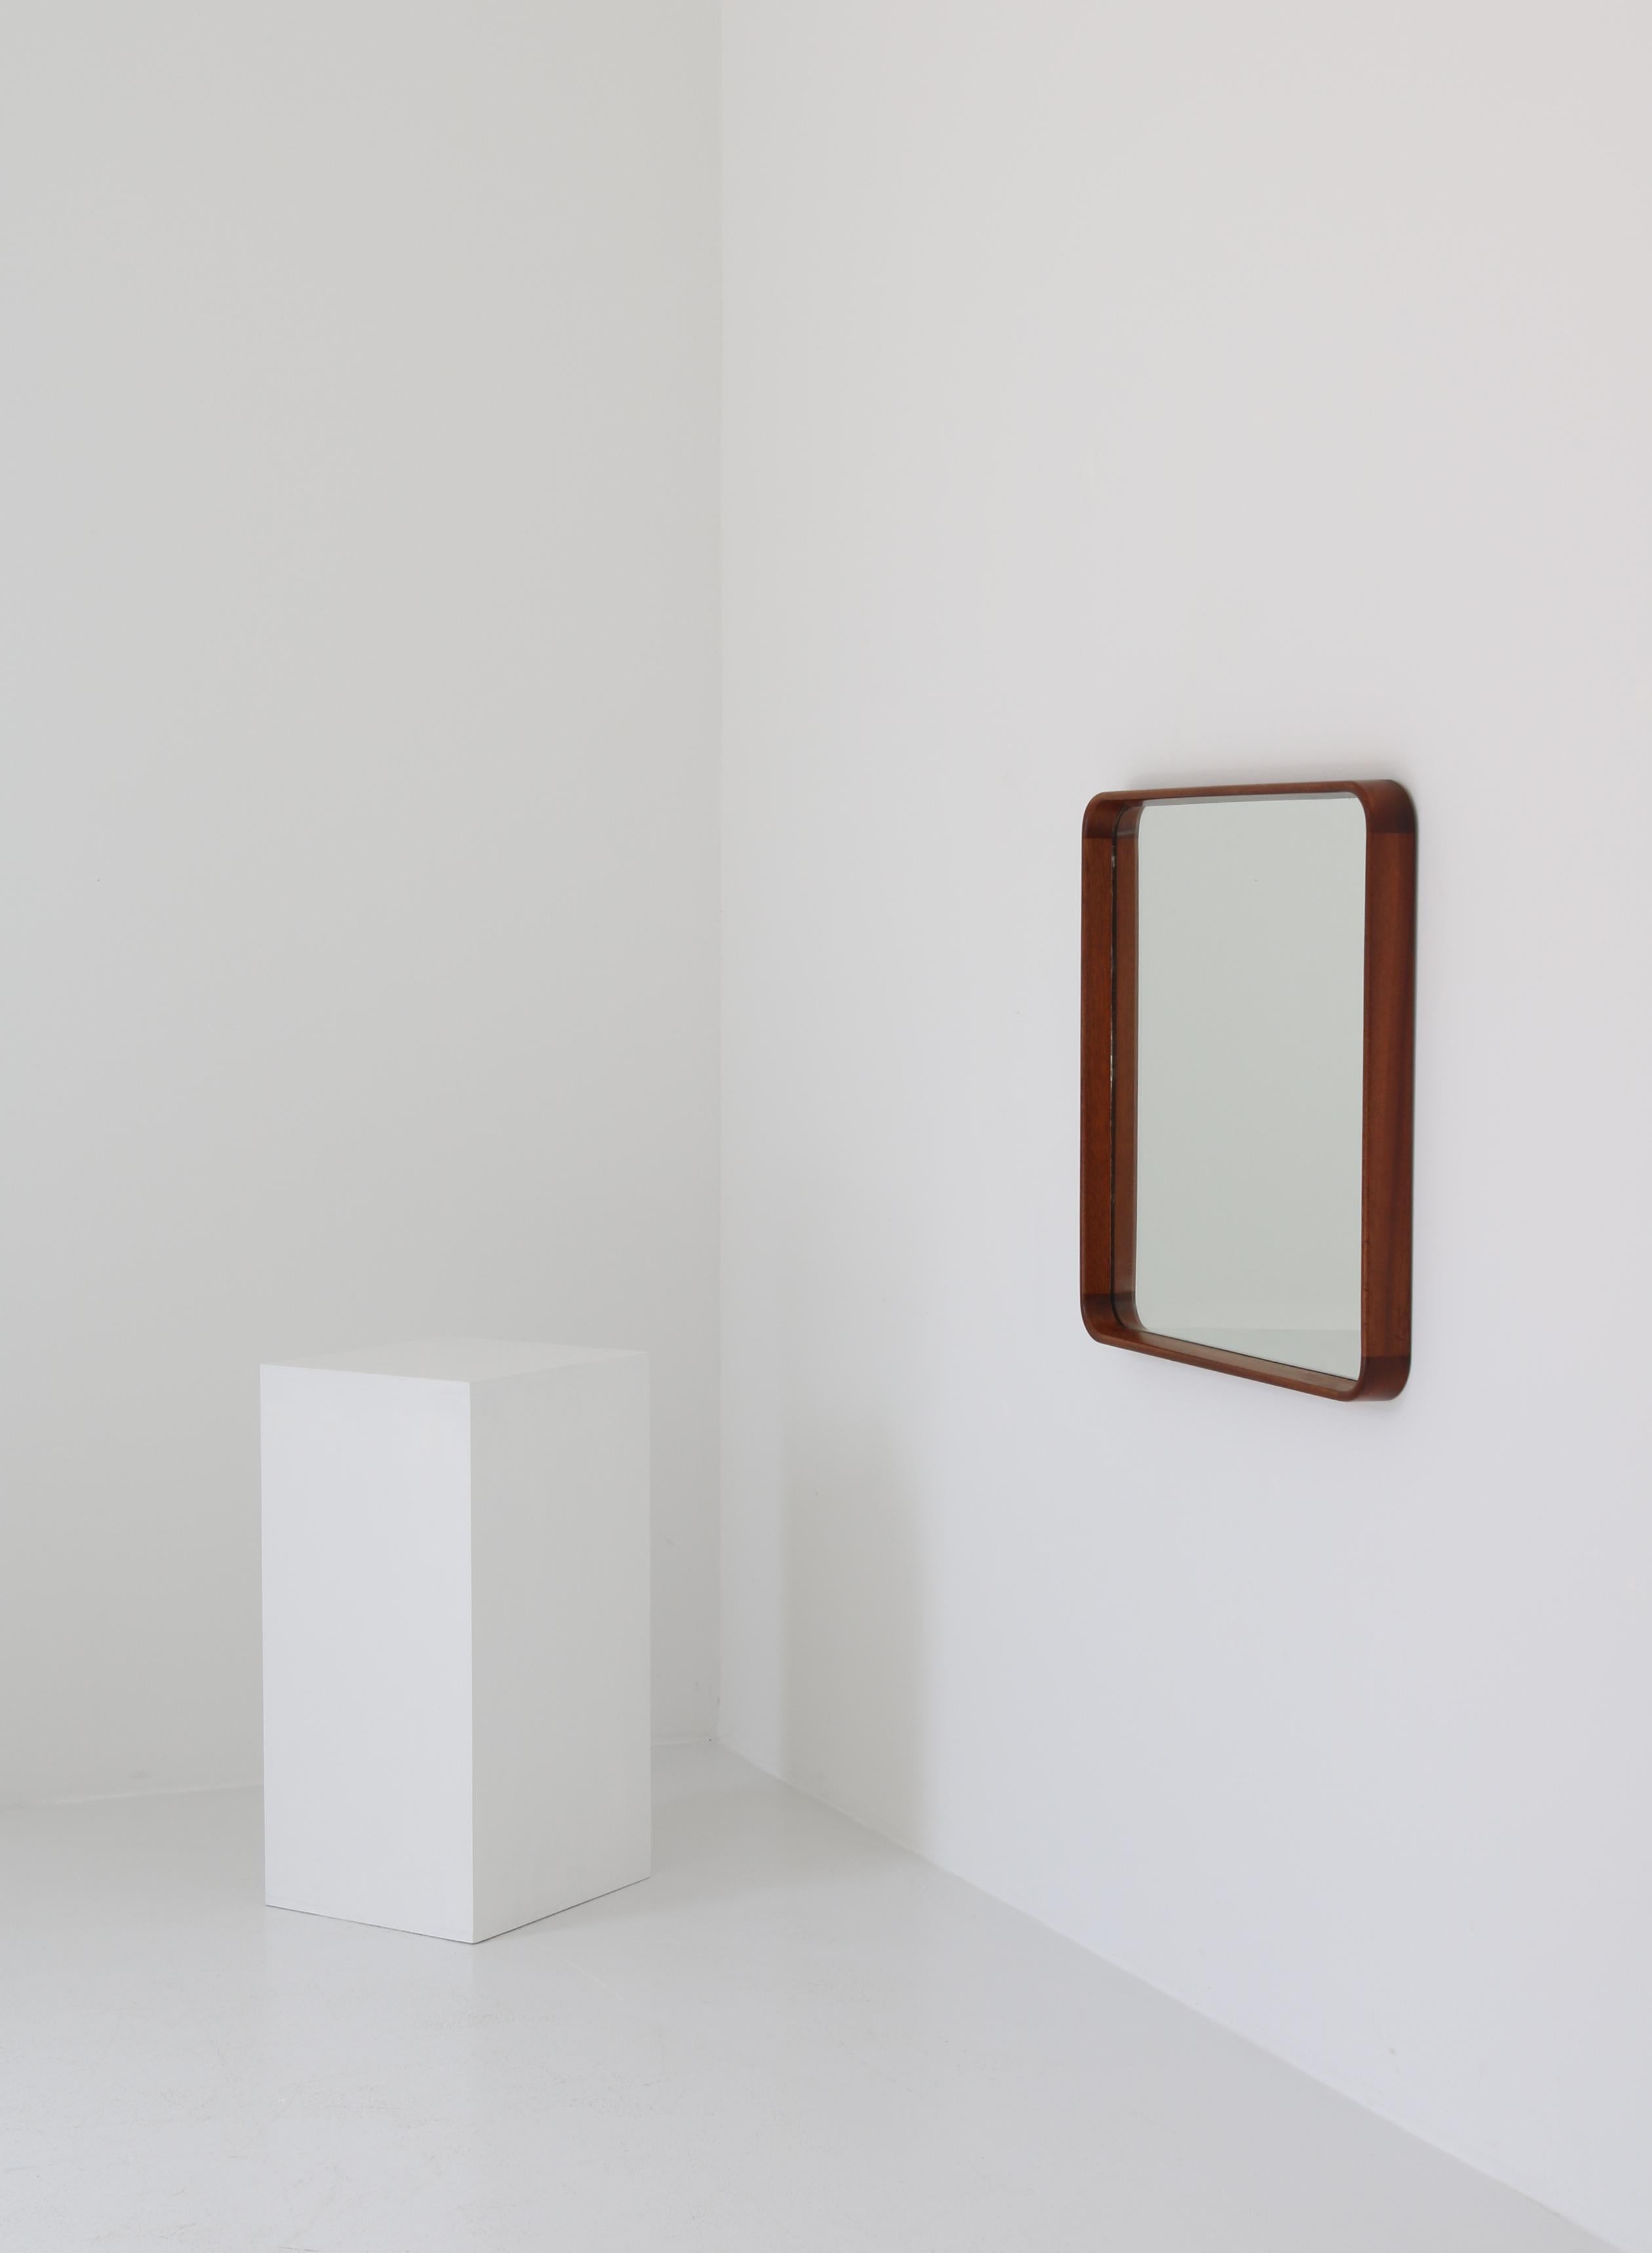 Rare wall mirror designed by Danish architect Vilhelm Lauritzen and executed in selected solid mahogany with a beautiful grain. Classic 1930 functionalism and superior craftsmanship makes this amazing piece a wonderful addition to any interior